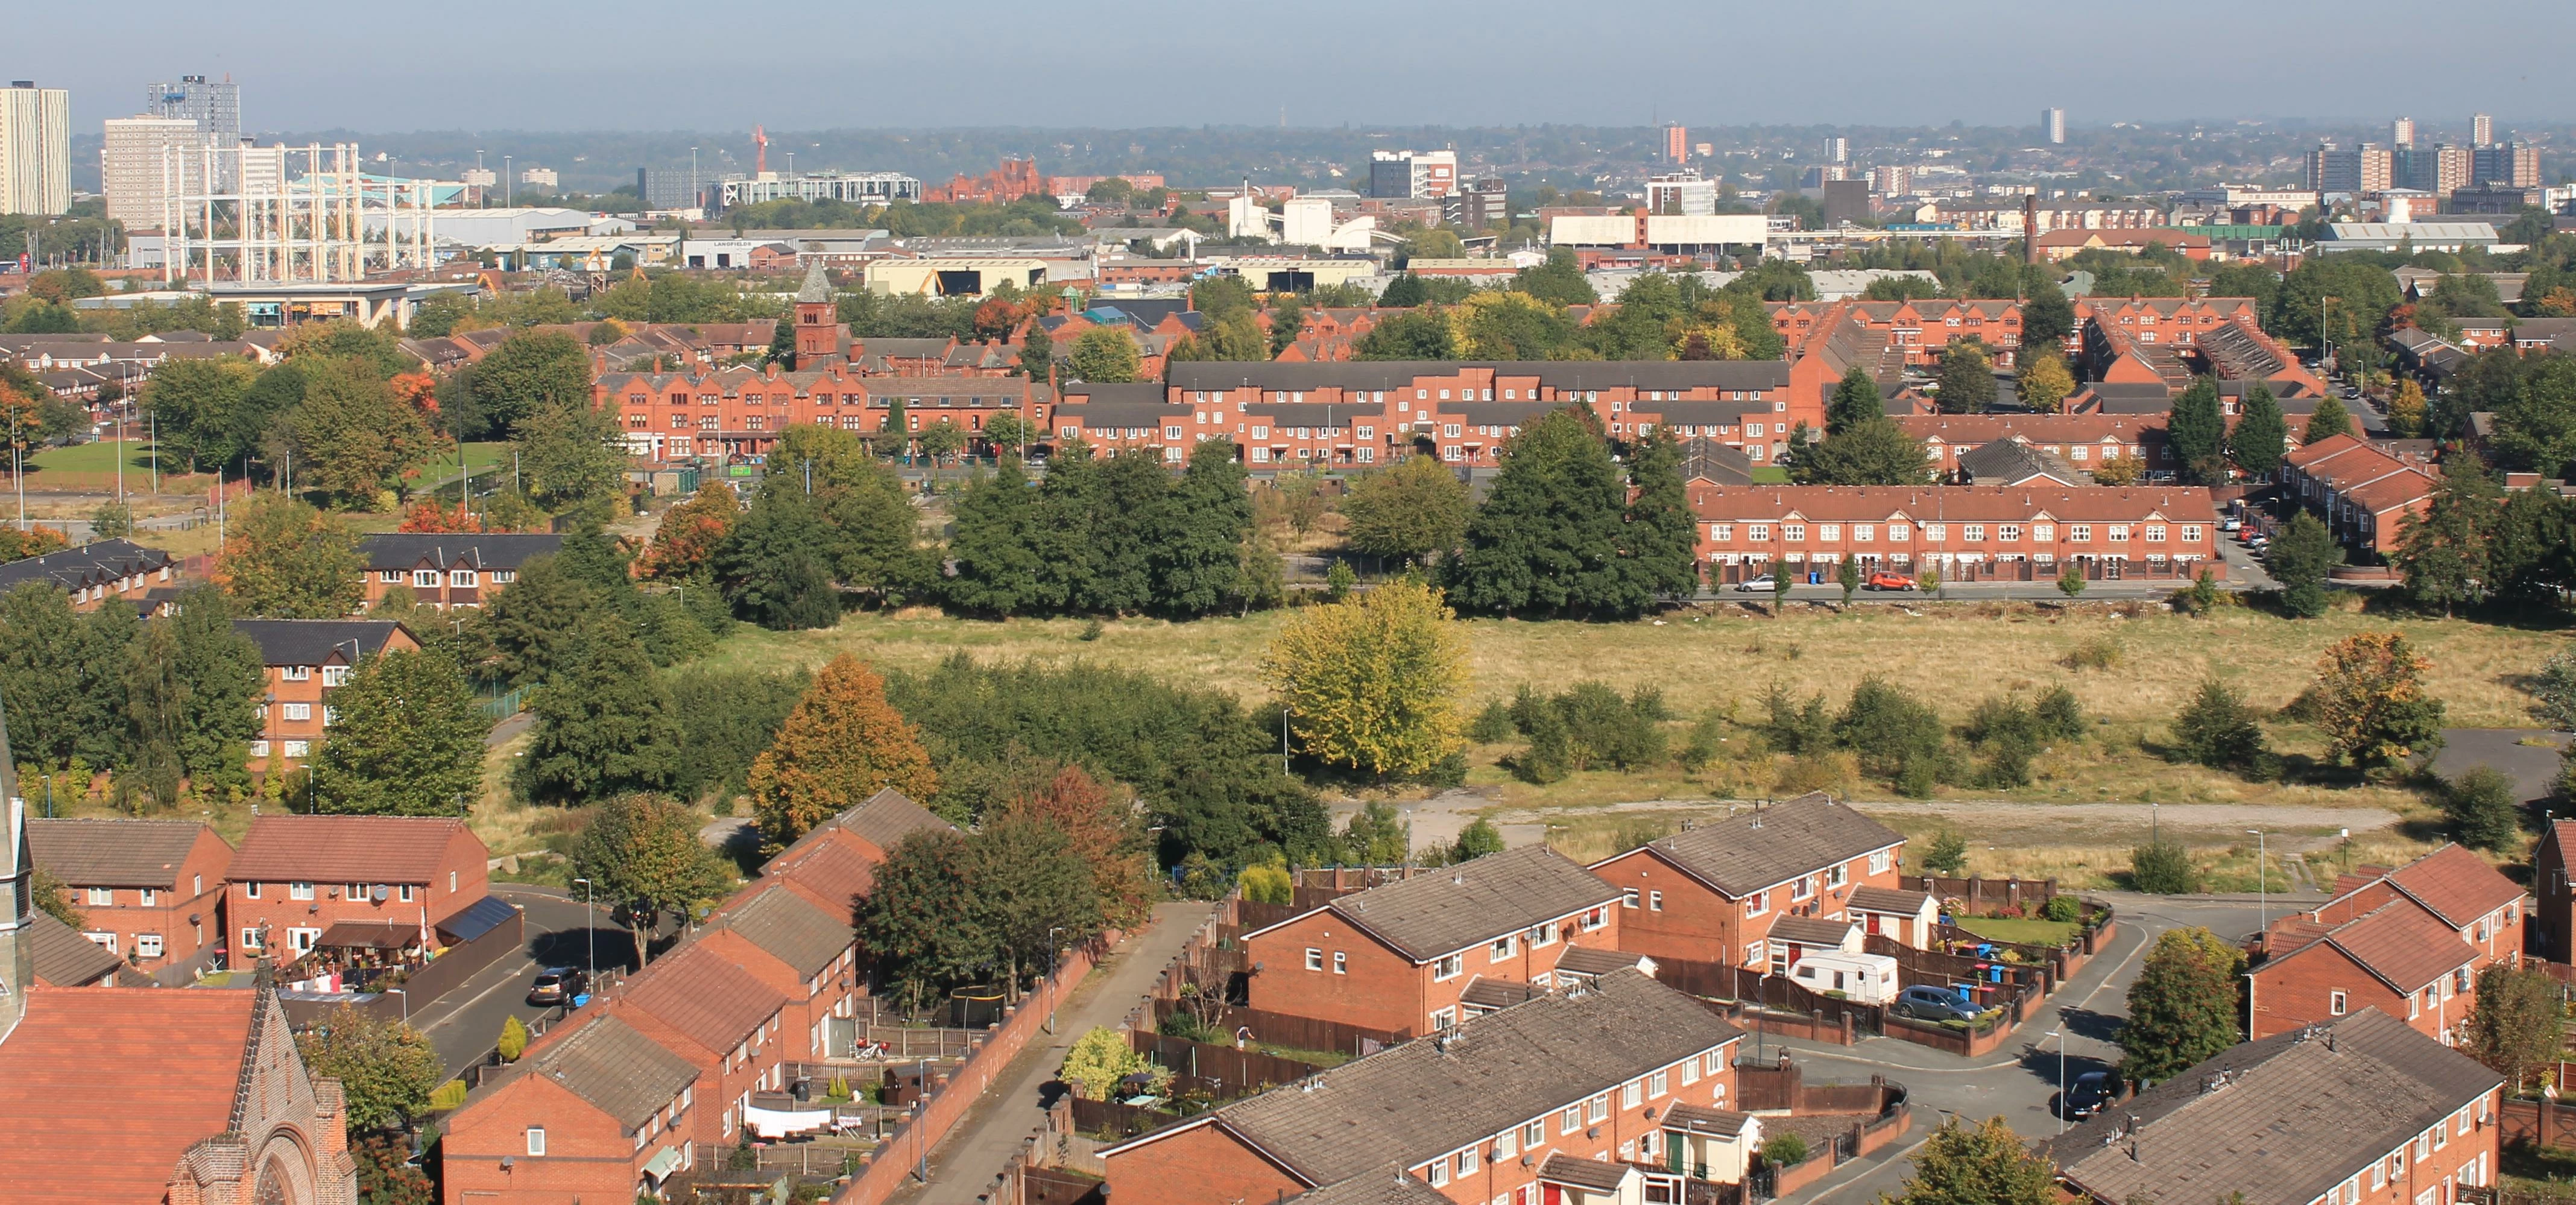 Salix Homes has invested £13.1m in Salford housing in first year